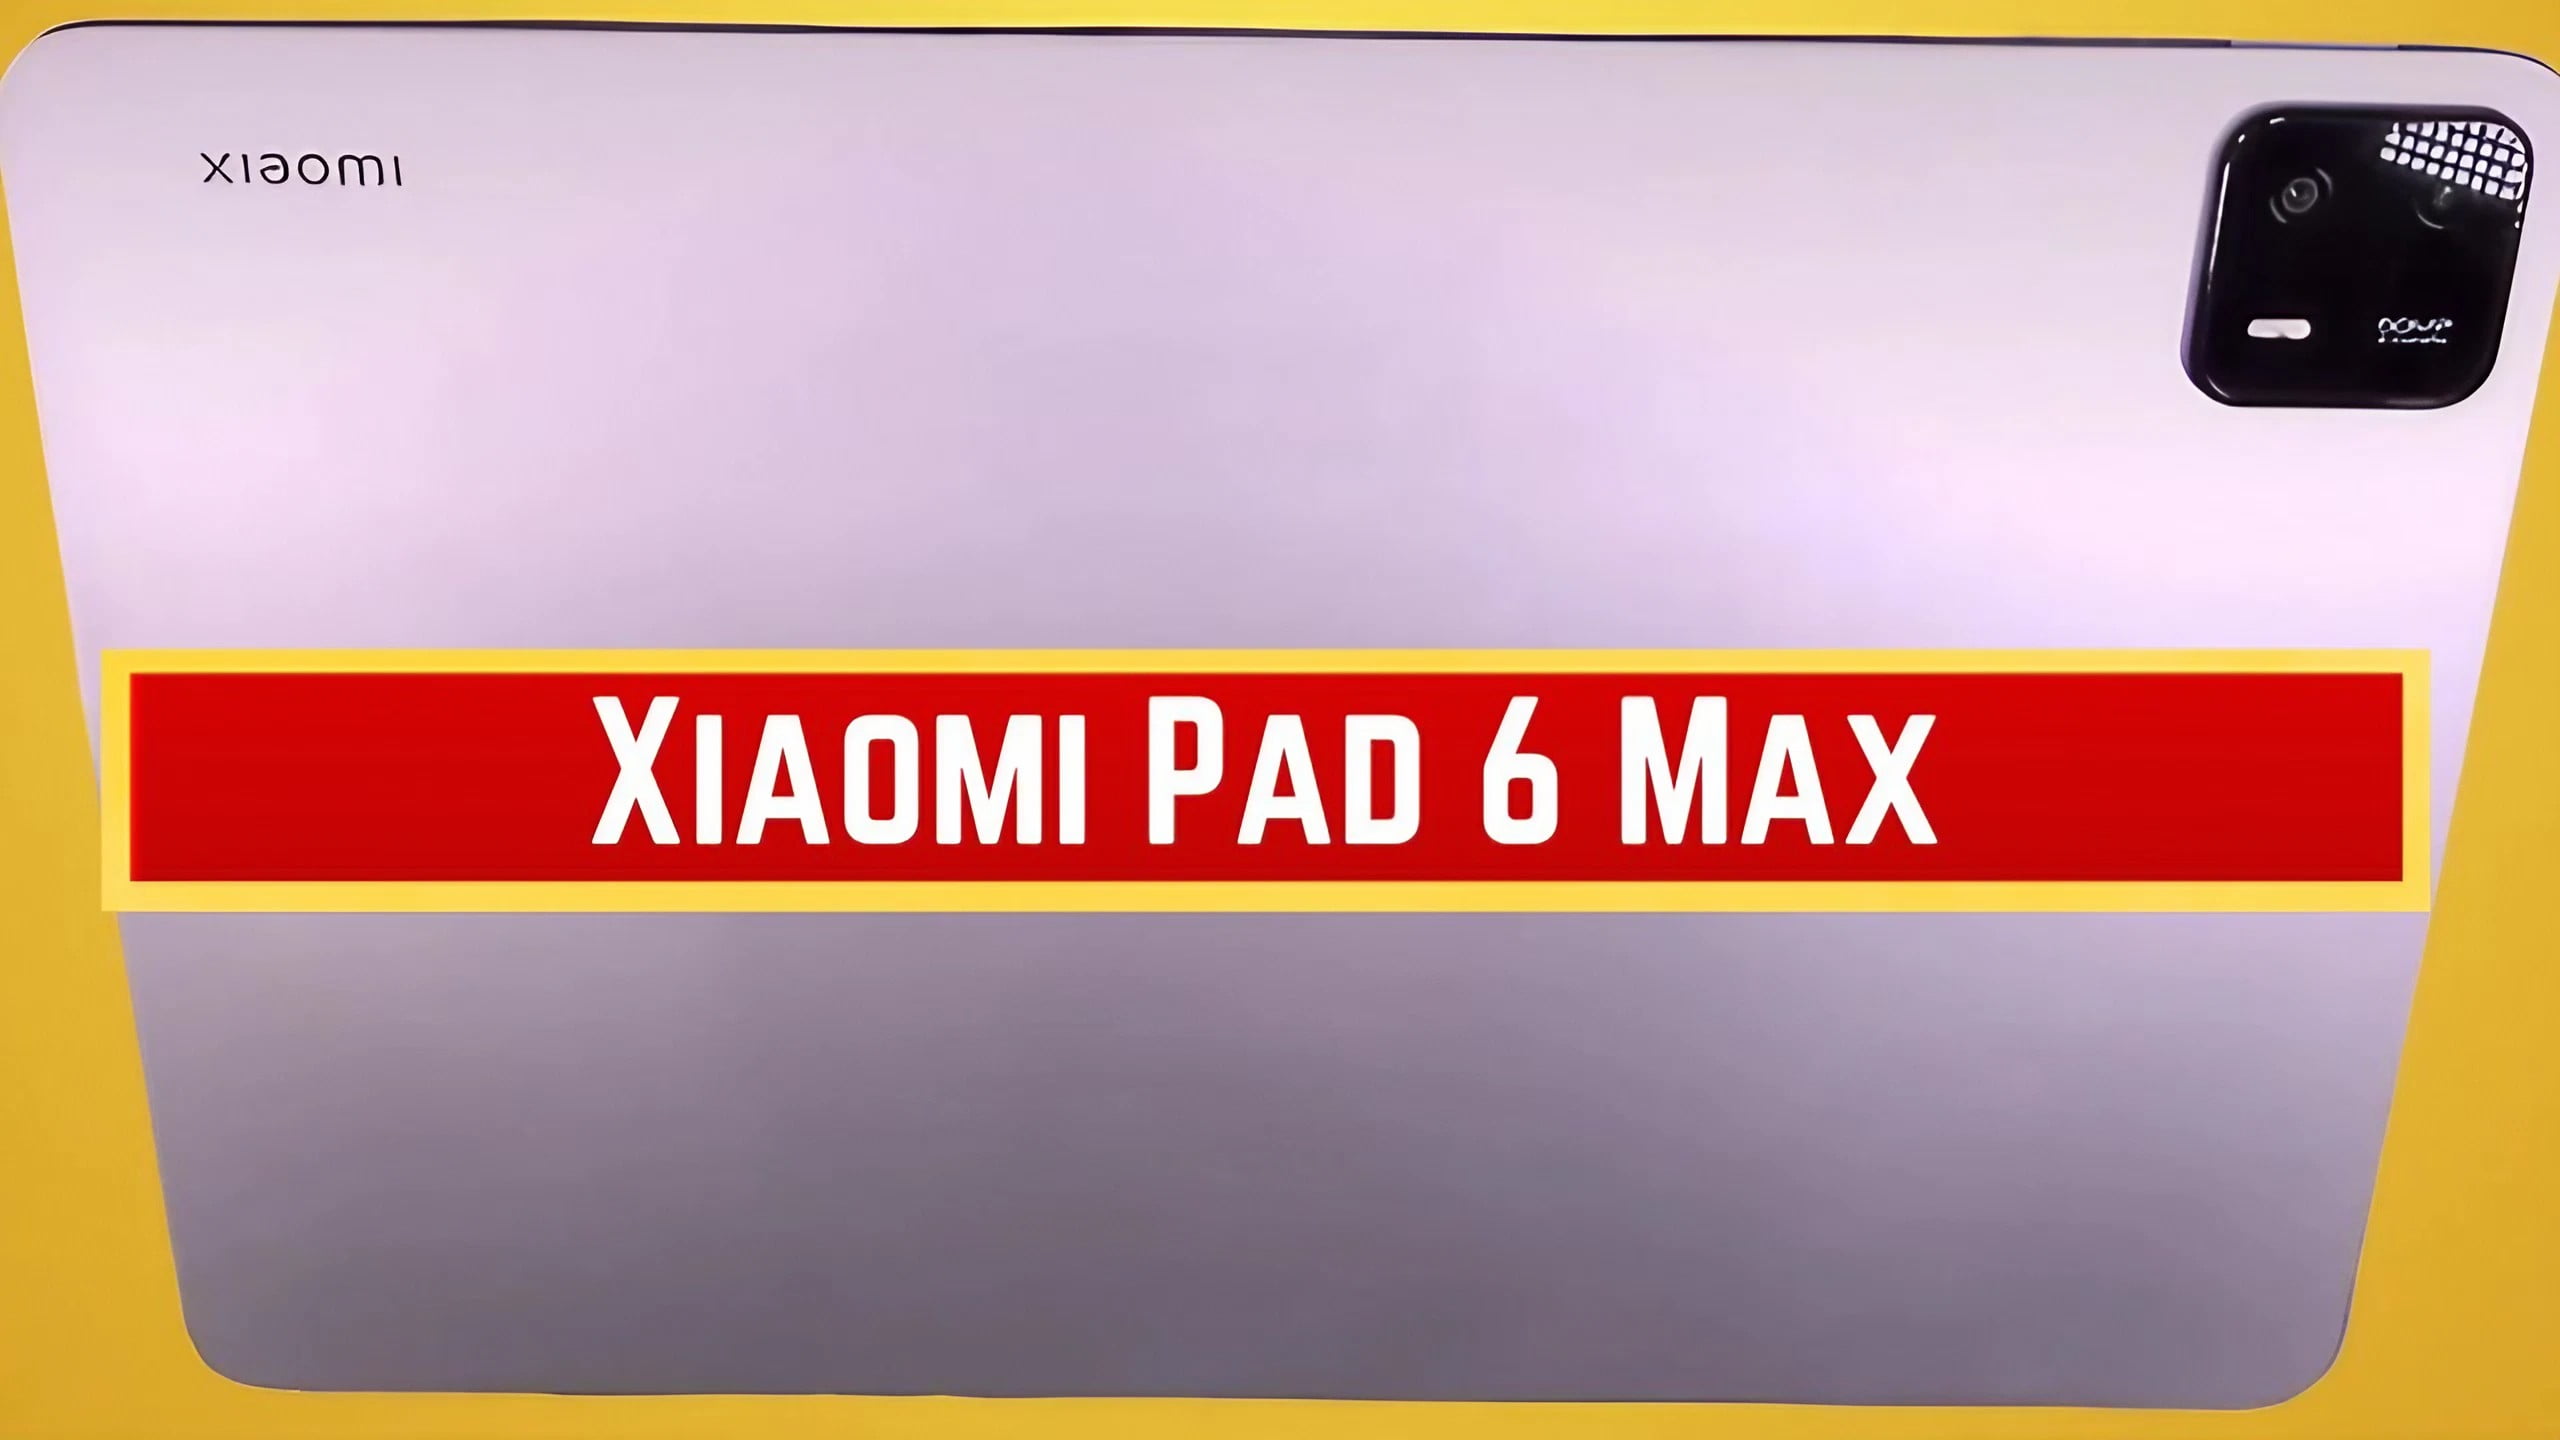 The Xiaomi Pad 6: A High-Performance Tablet for Work and Entertainment